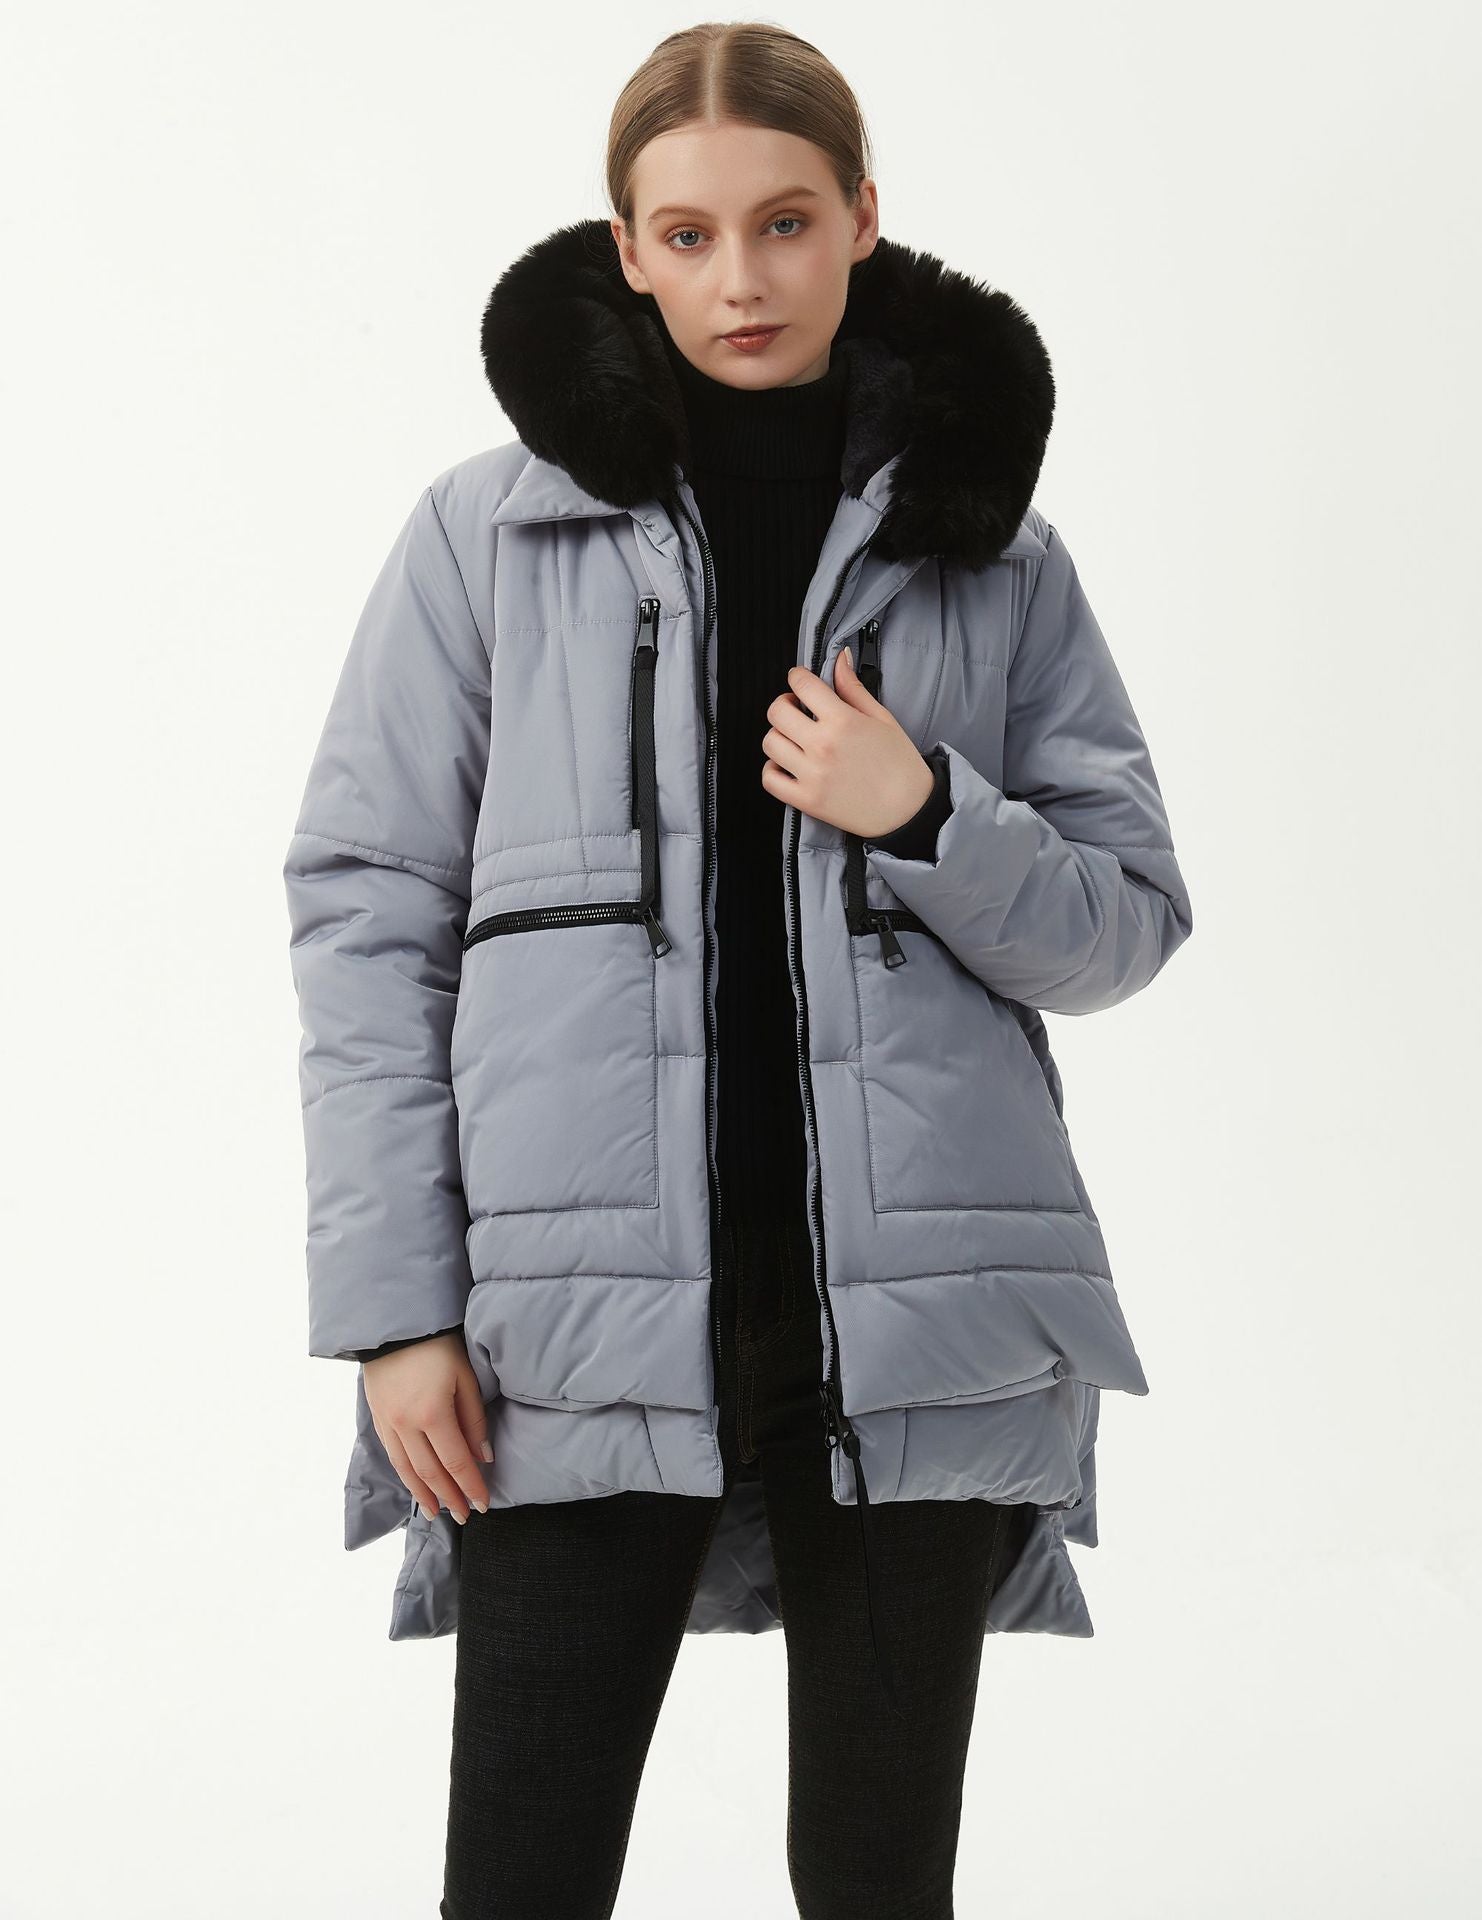 jackets  | Women's Casual Hooded Middle Long Cotton-padded Coat | Light Gray |  L| thecurvestory.myshopify.com